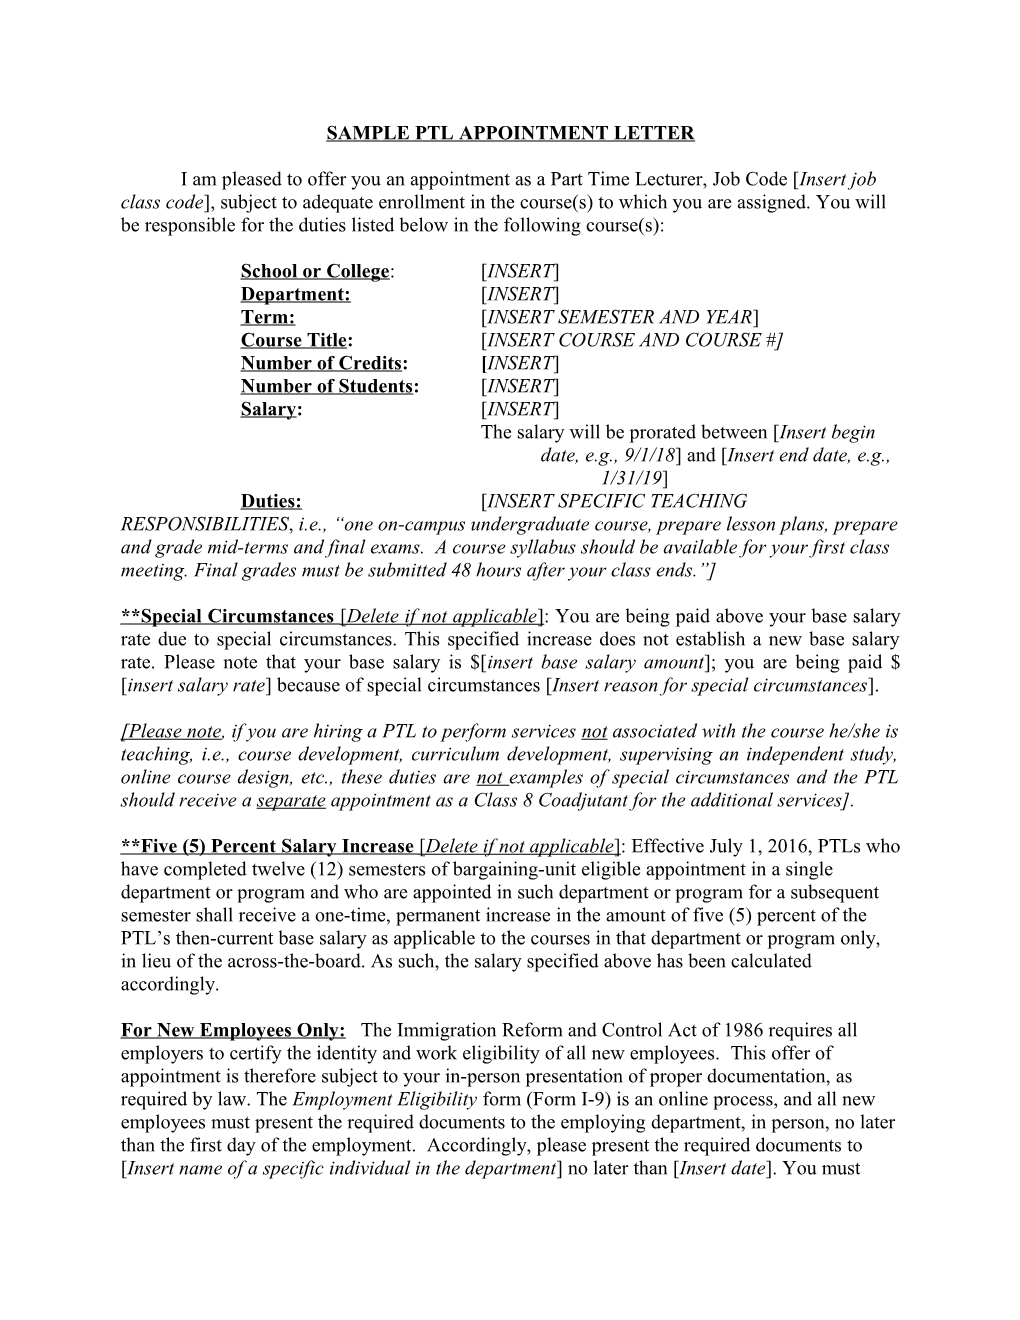 Sample PTL Appointment Letter (00217347)